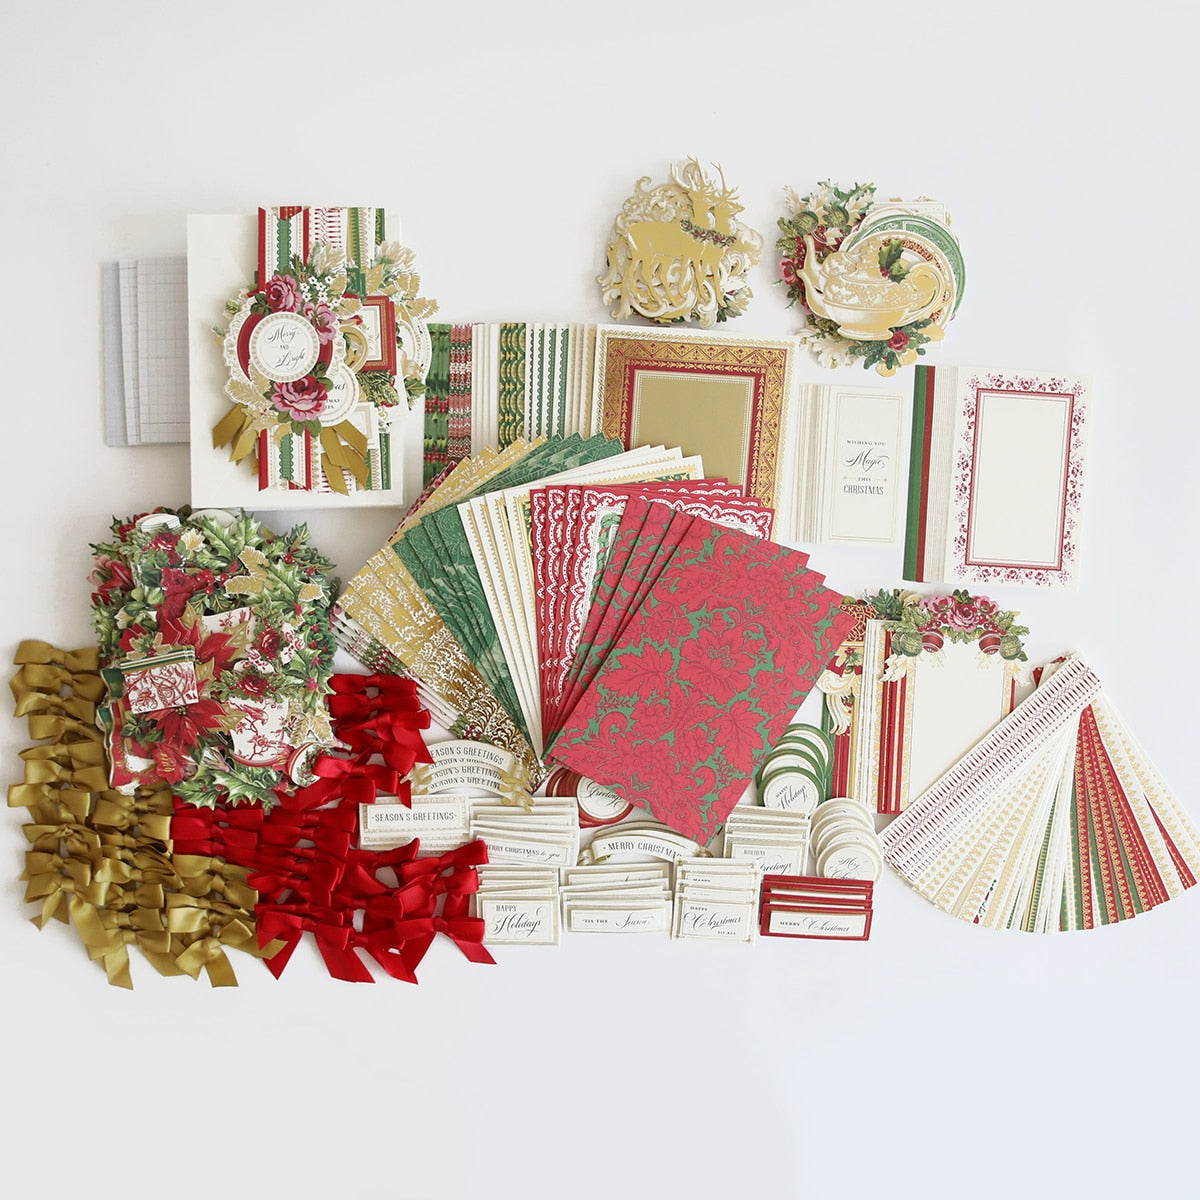 A Christmas Wishes Card Making Kit, papers, and ribbons.